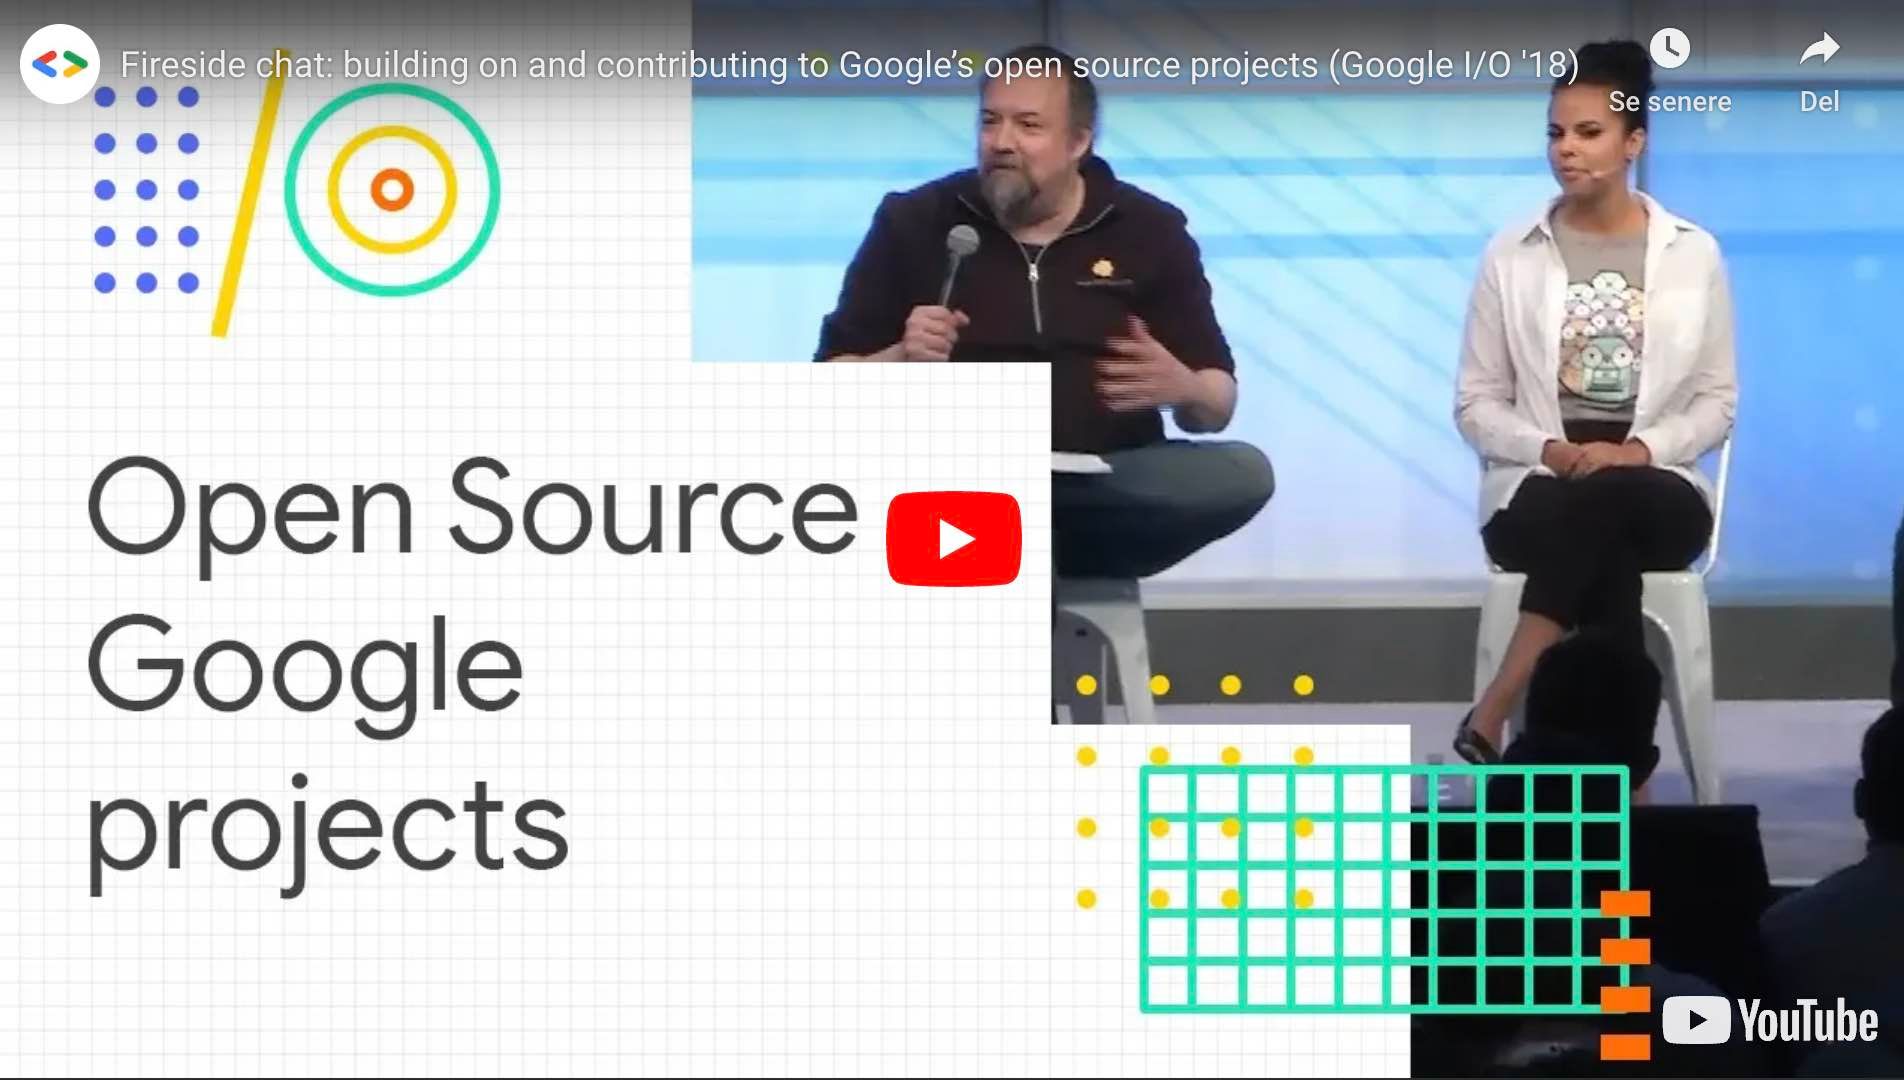 Google Open Source projects 